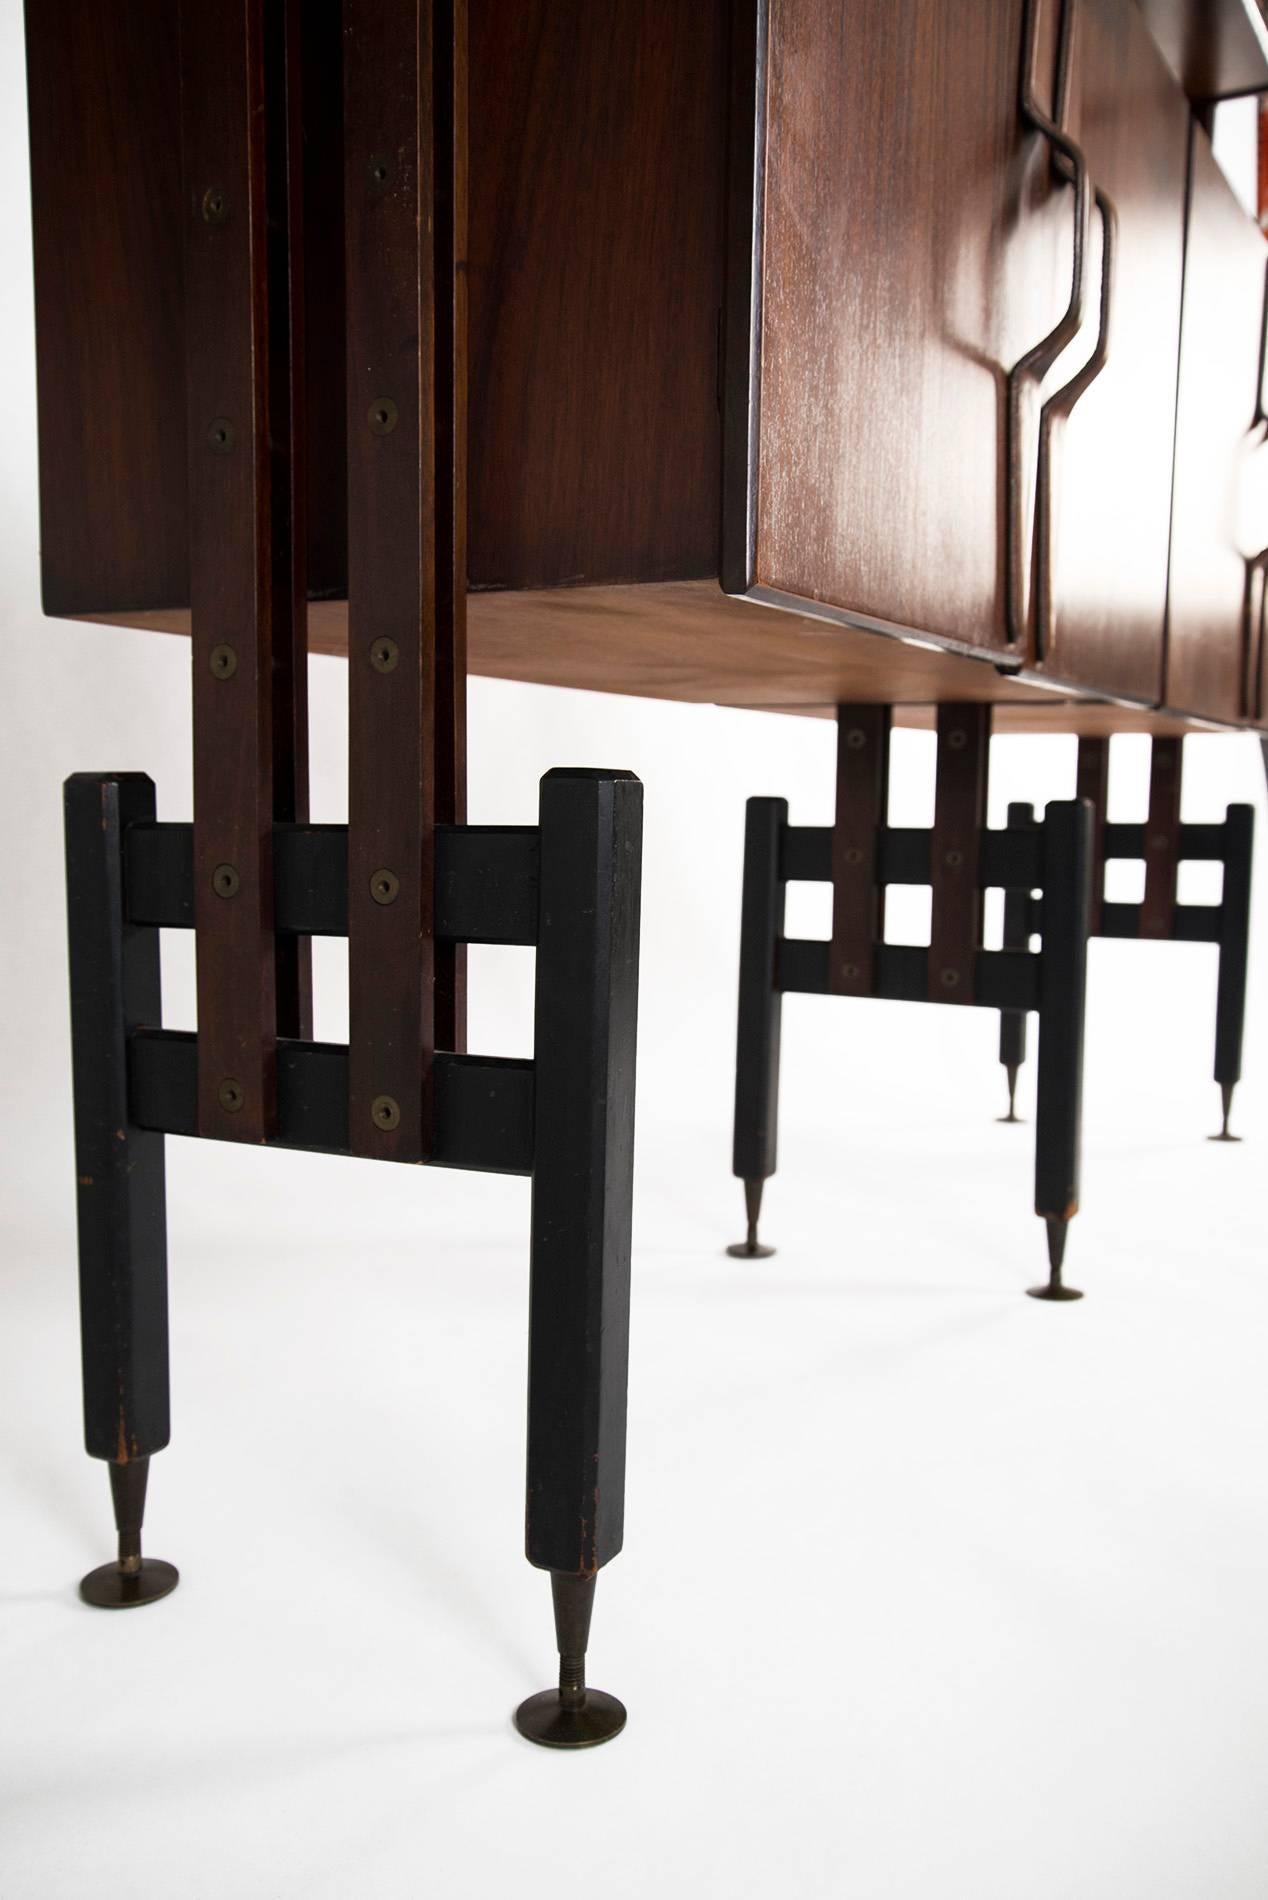 Large Adjustable Rosewood and Leather Bookcase, Italy, 1950 1